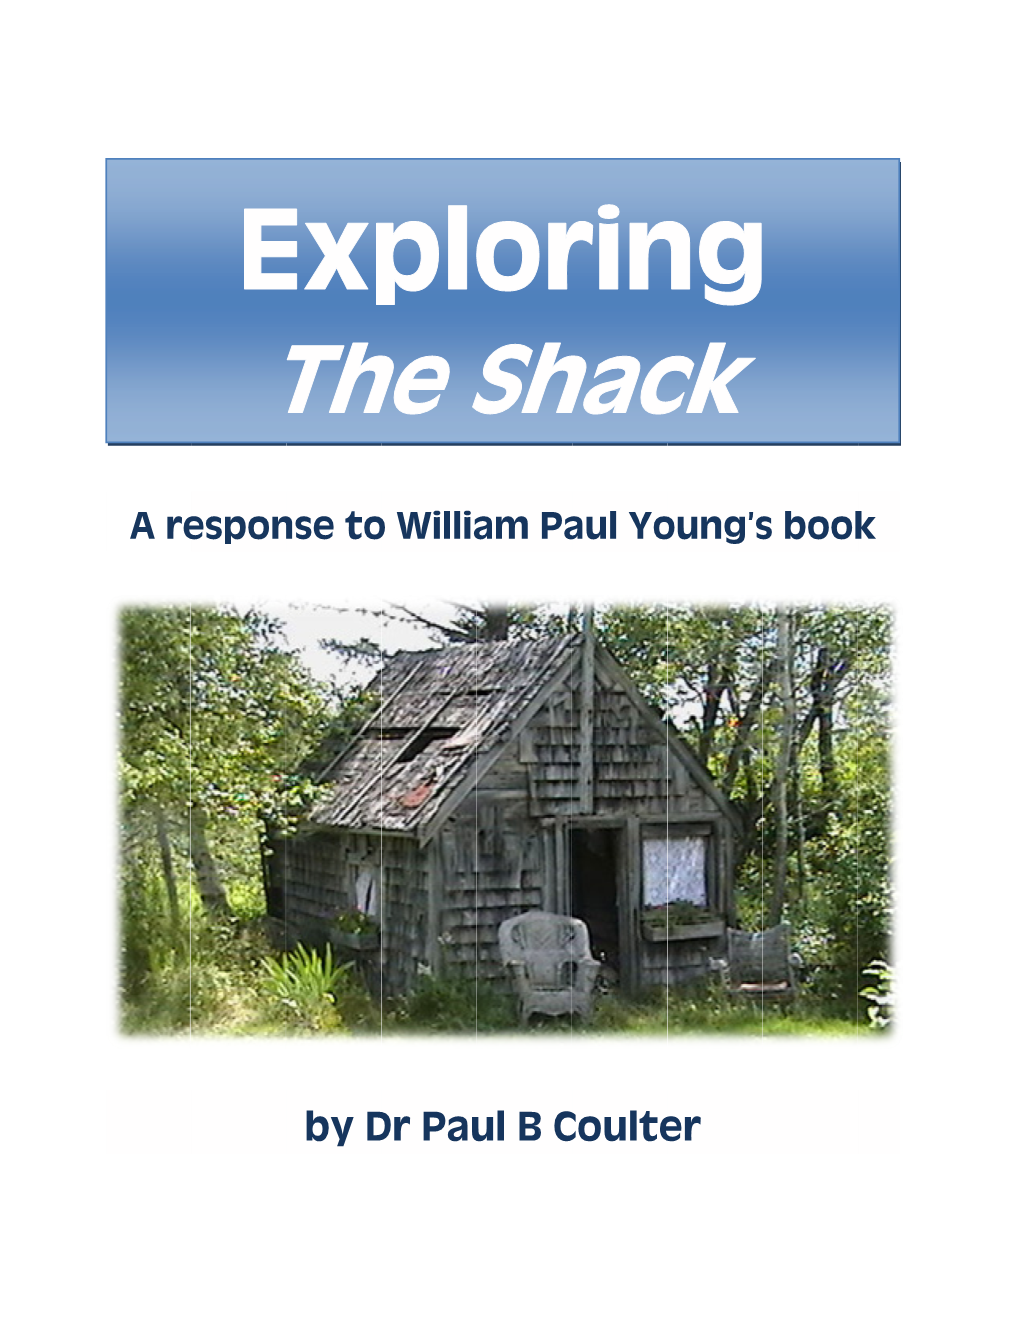 "Exploring the Shack" by Dr Paul